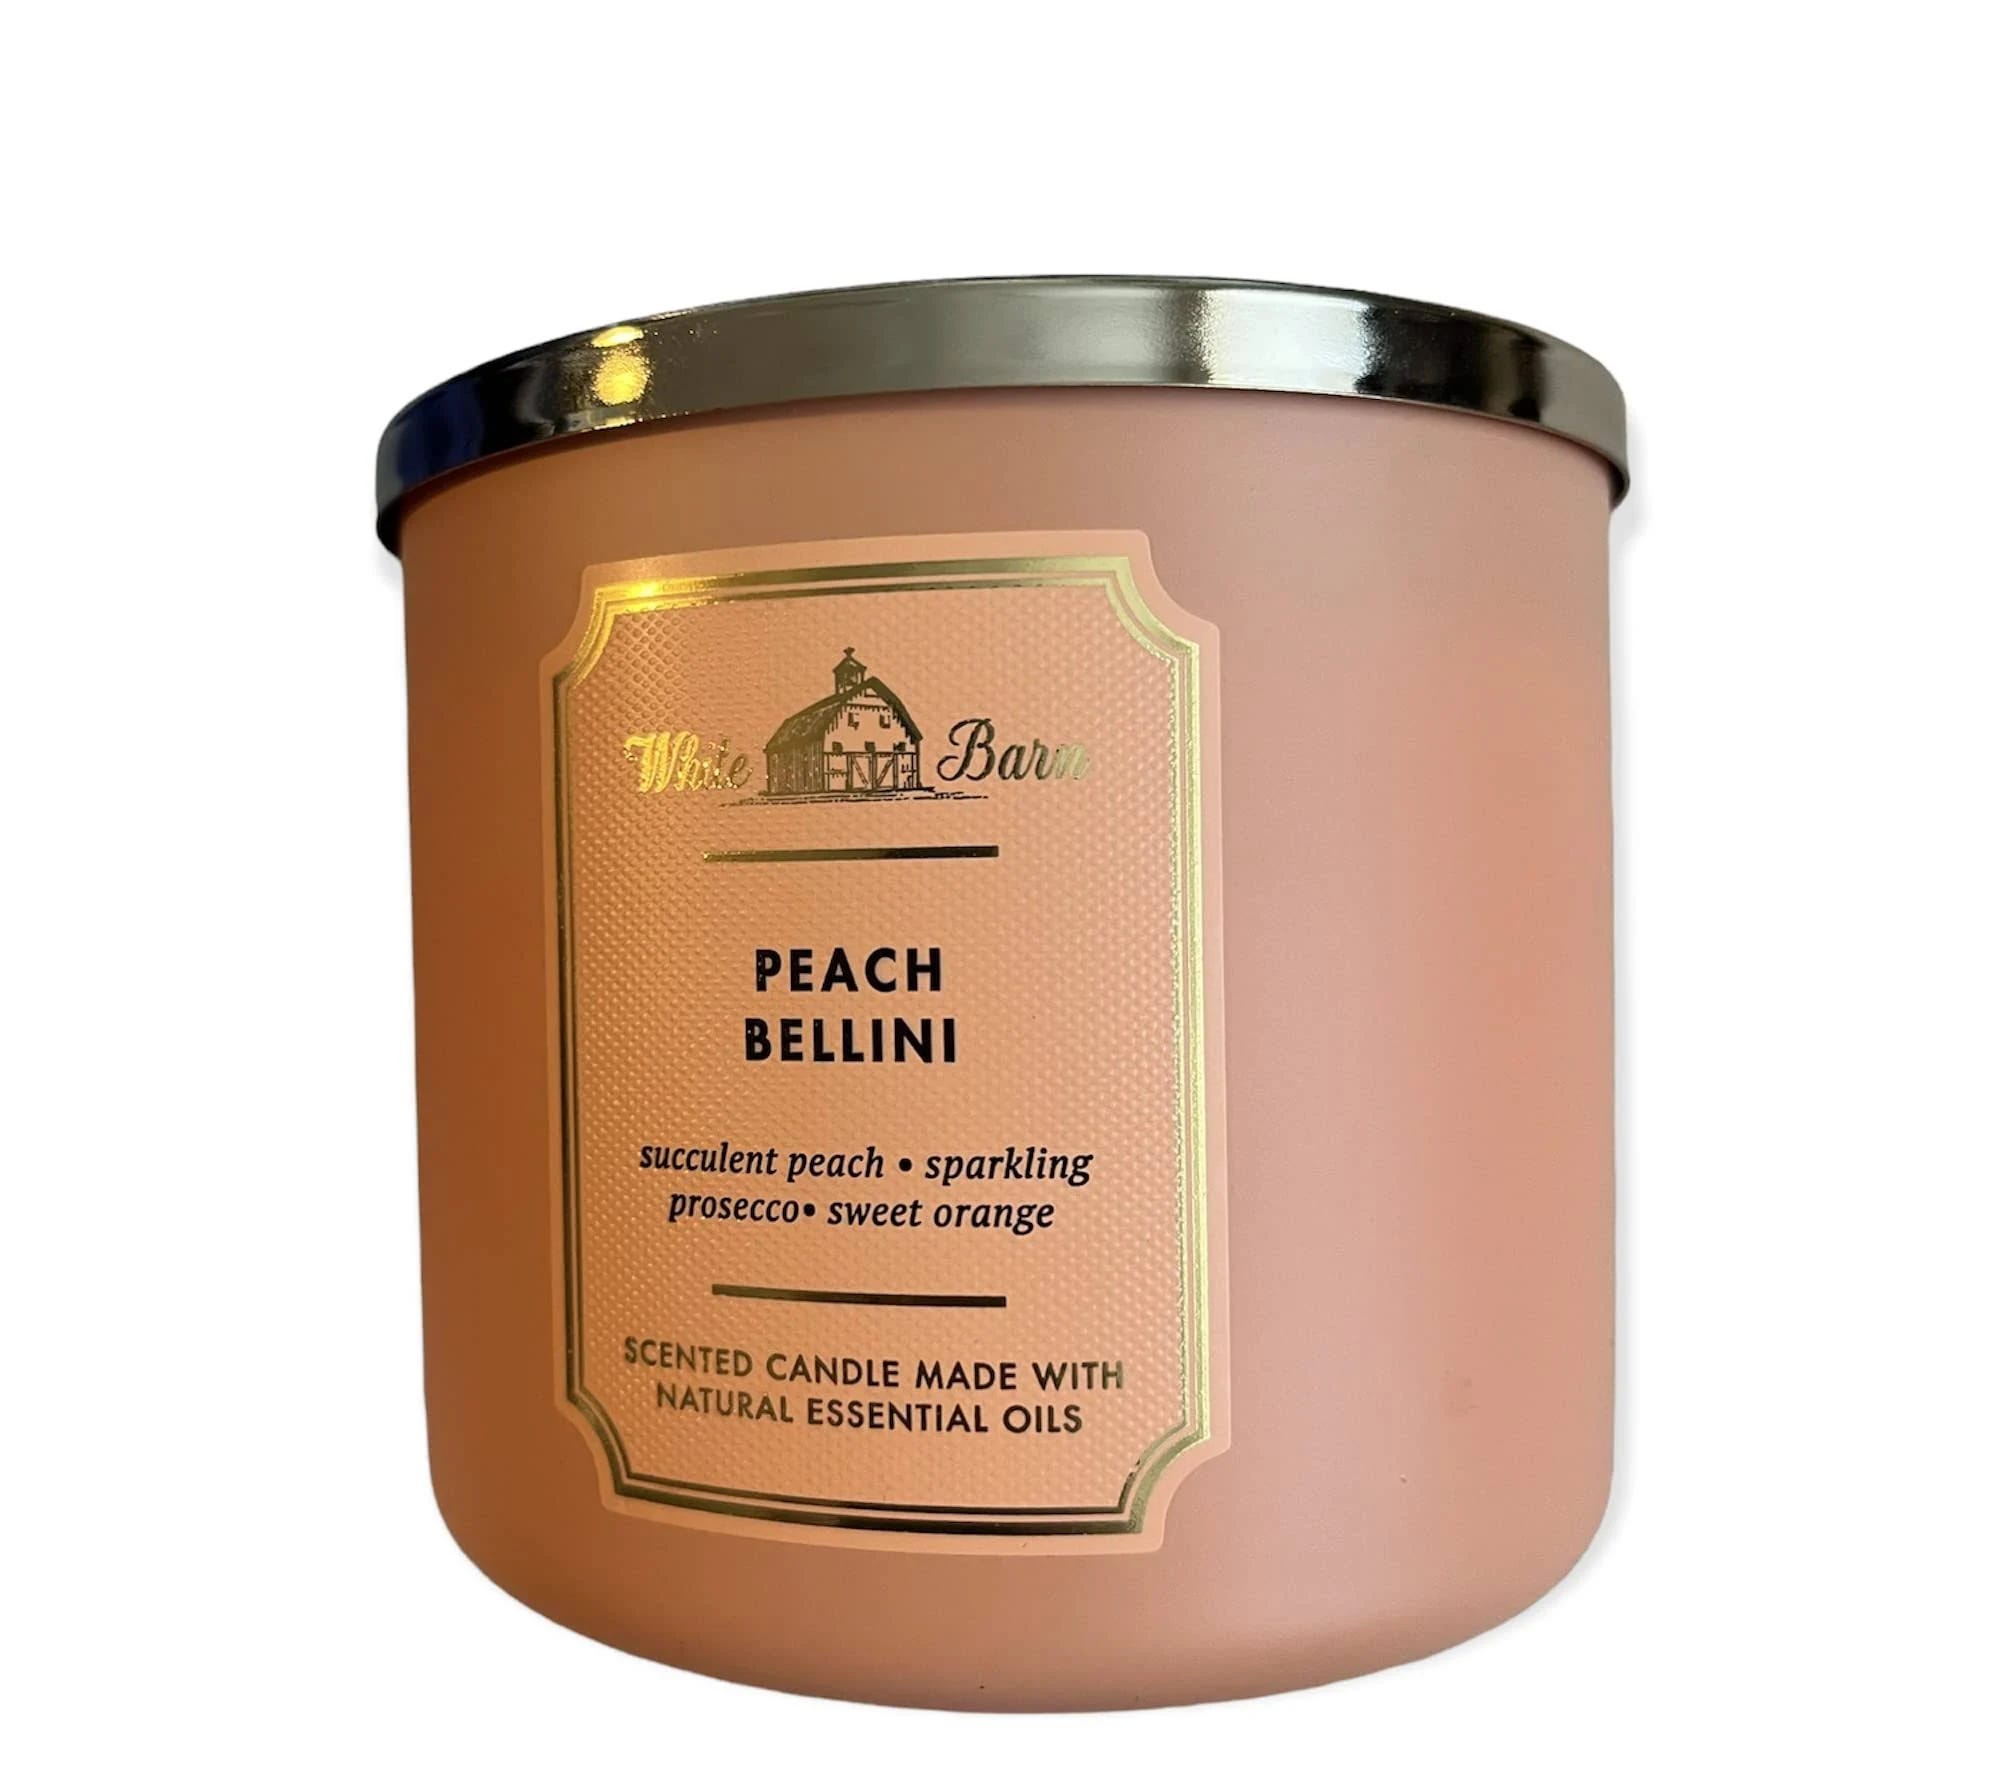 Bath & Body Works White Barn Peach Bellini 3-Wick Scented Candle (14.5 Ounce) | Image